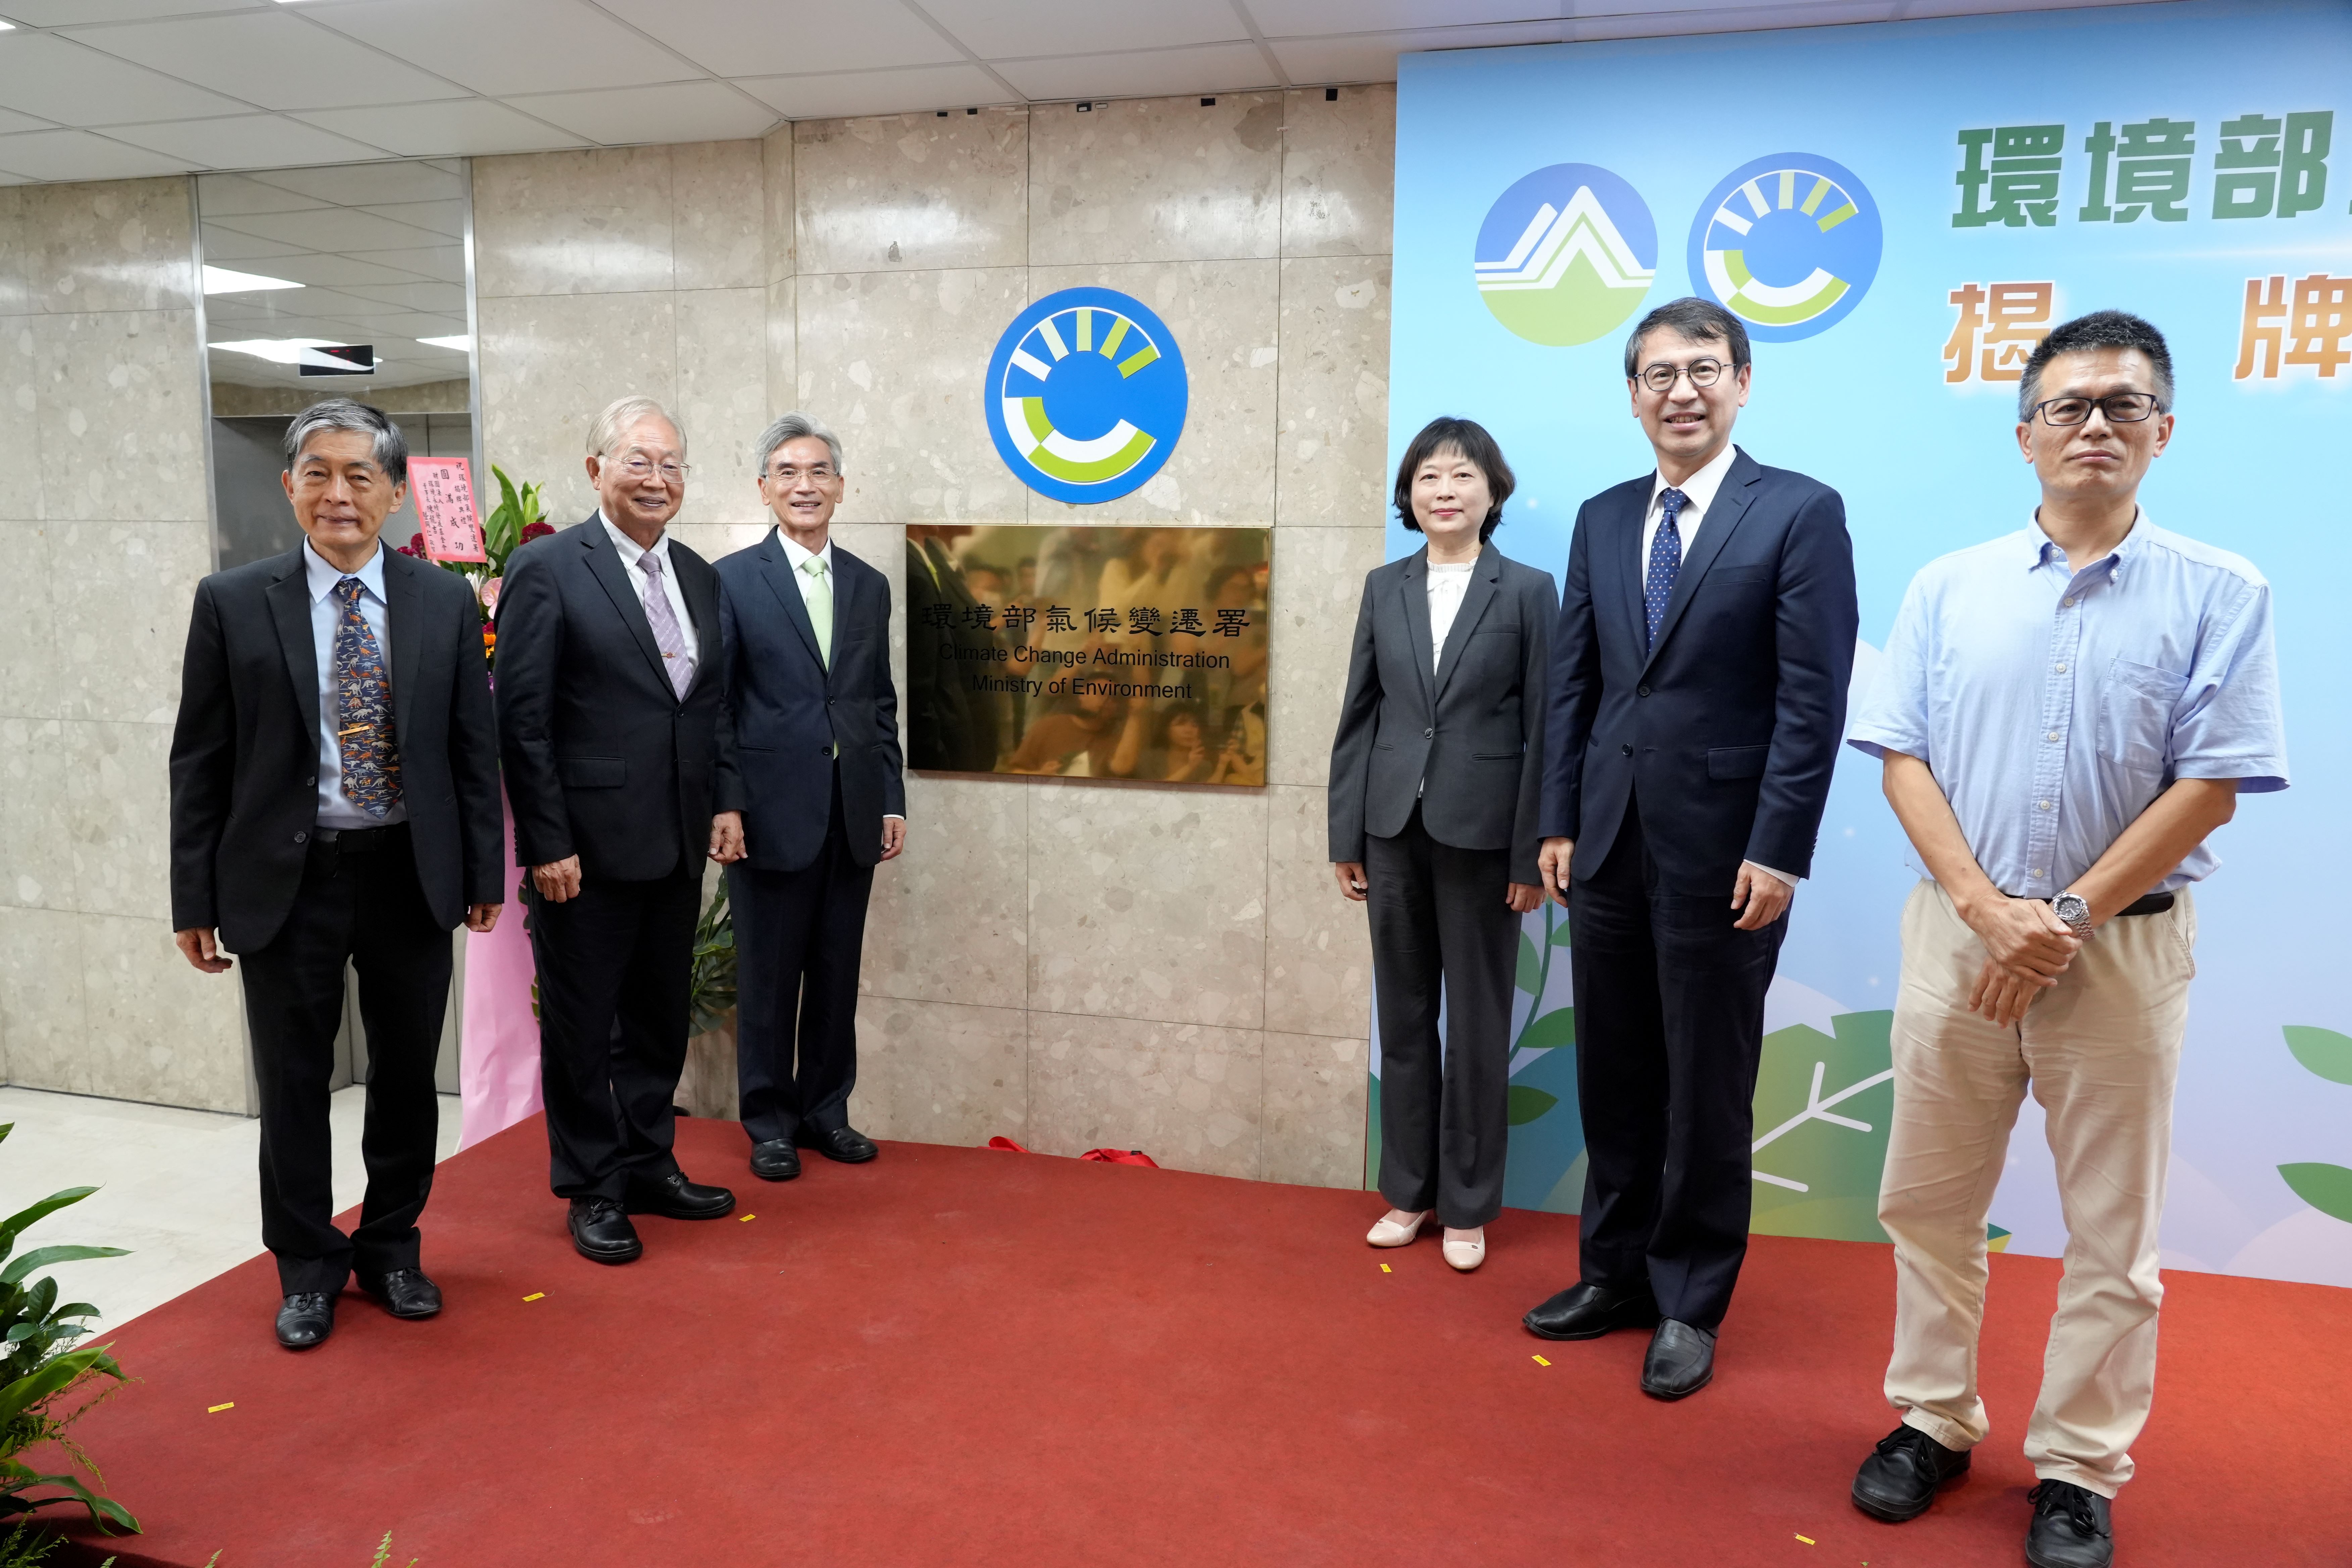 The Climate Change Administration (CCA) of the Ministry of Environment, Taiwan’s first agency dedicated to confronting climate change, was officially inaugurated today (Aug. 22).